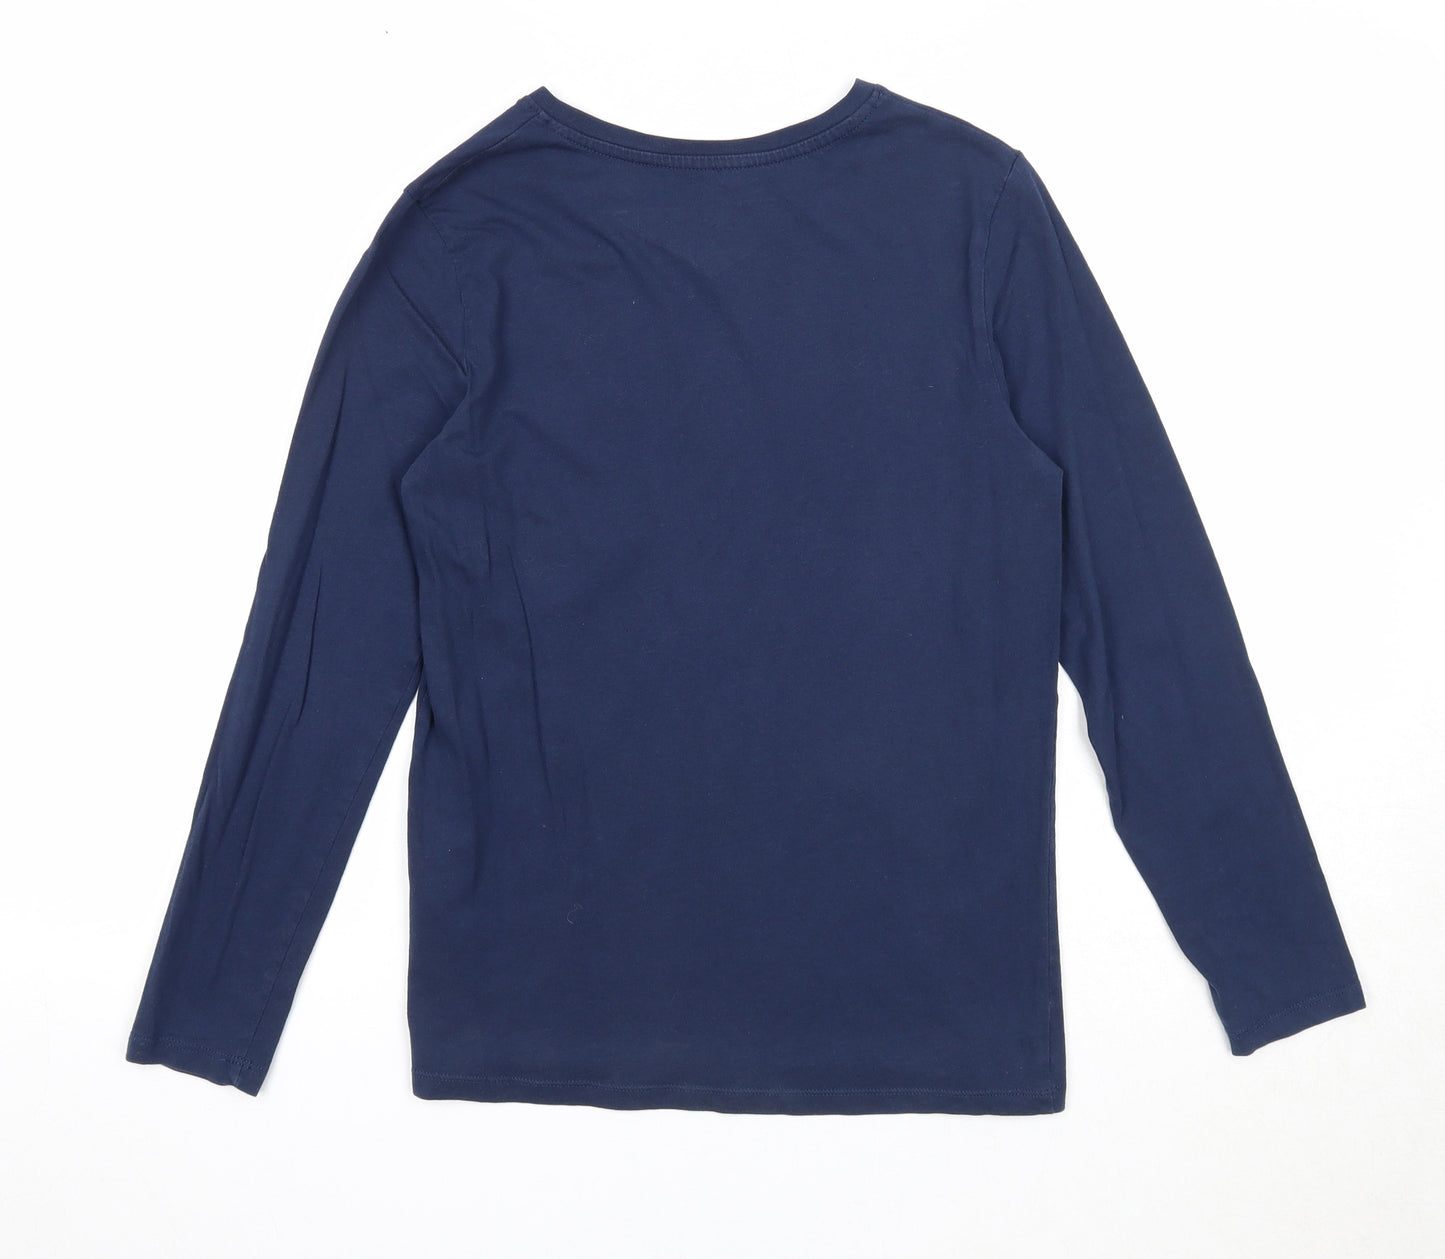 H&M Girls Blue Cotton Basic T-Shirt Size 11-12 Years V-Neck Pullover